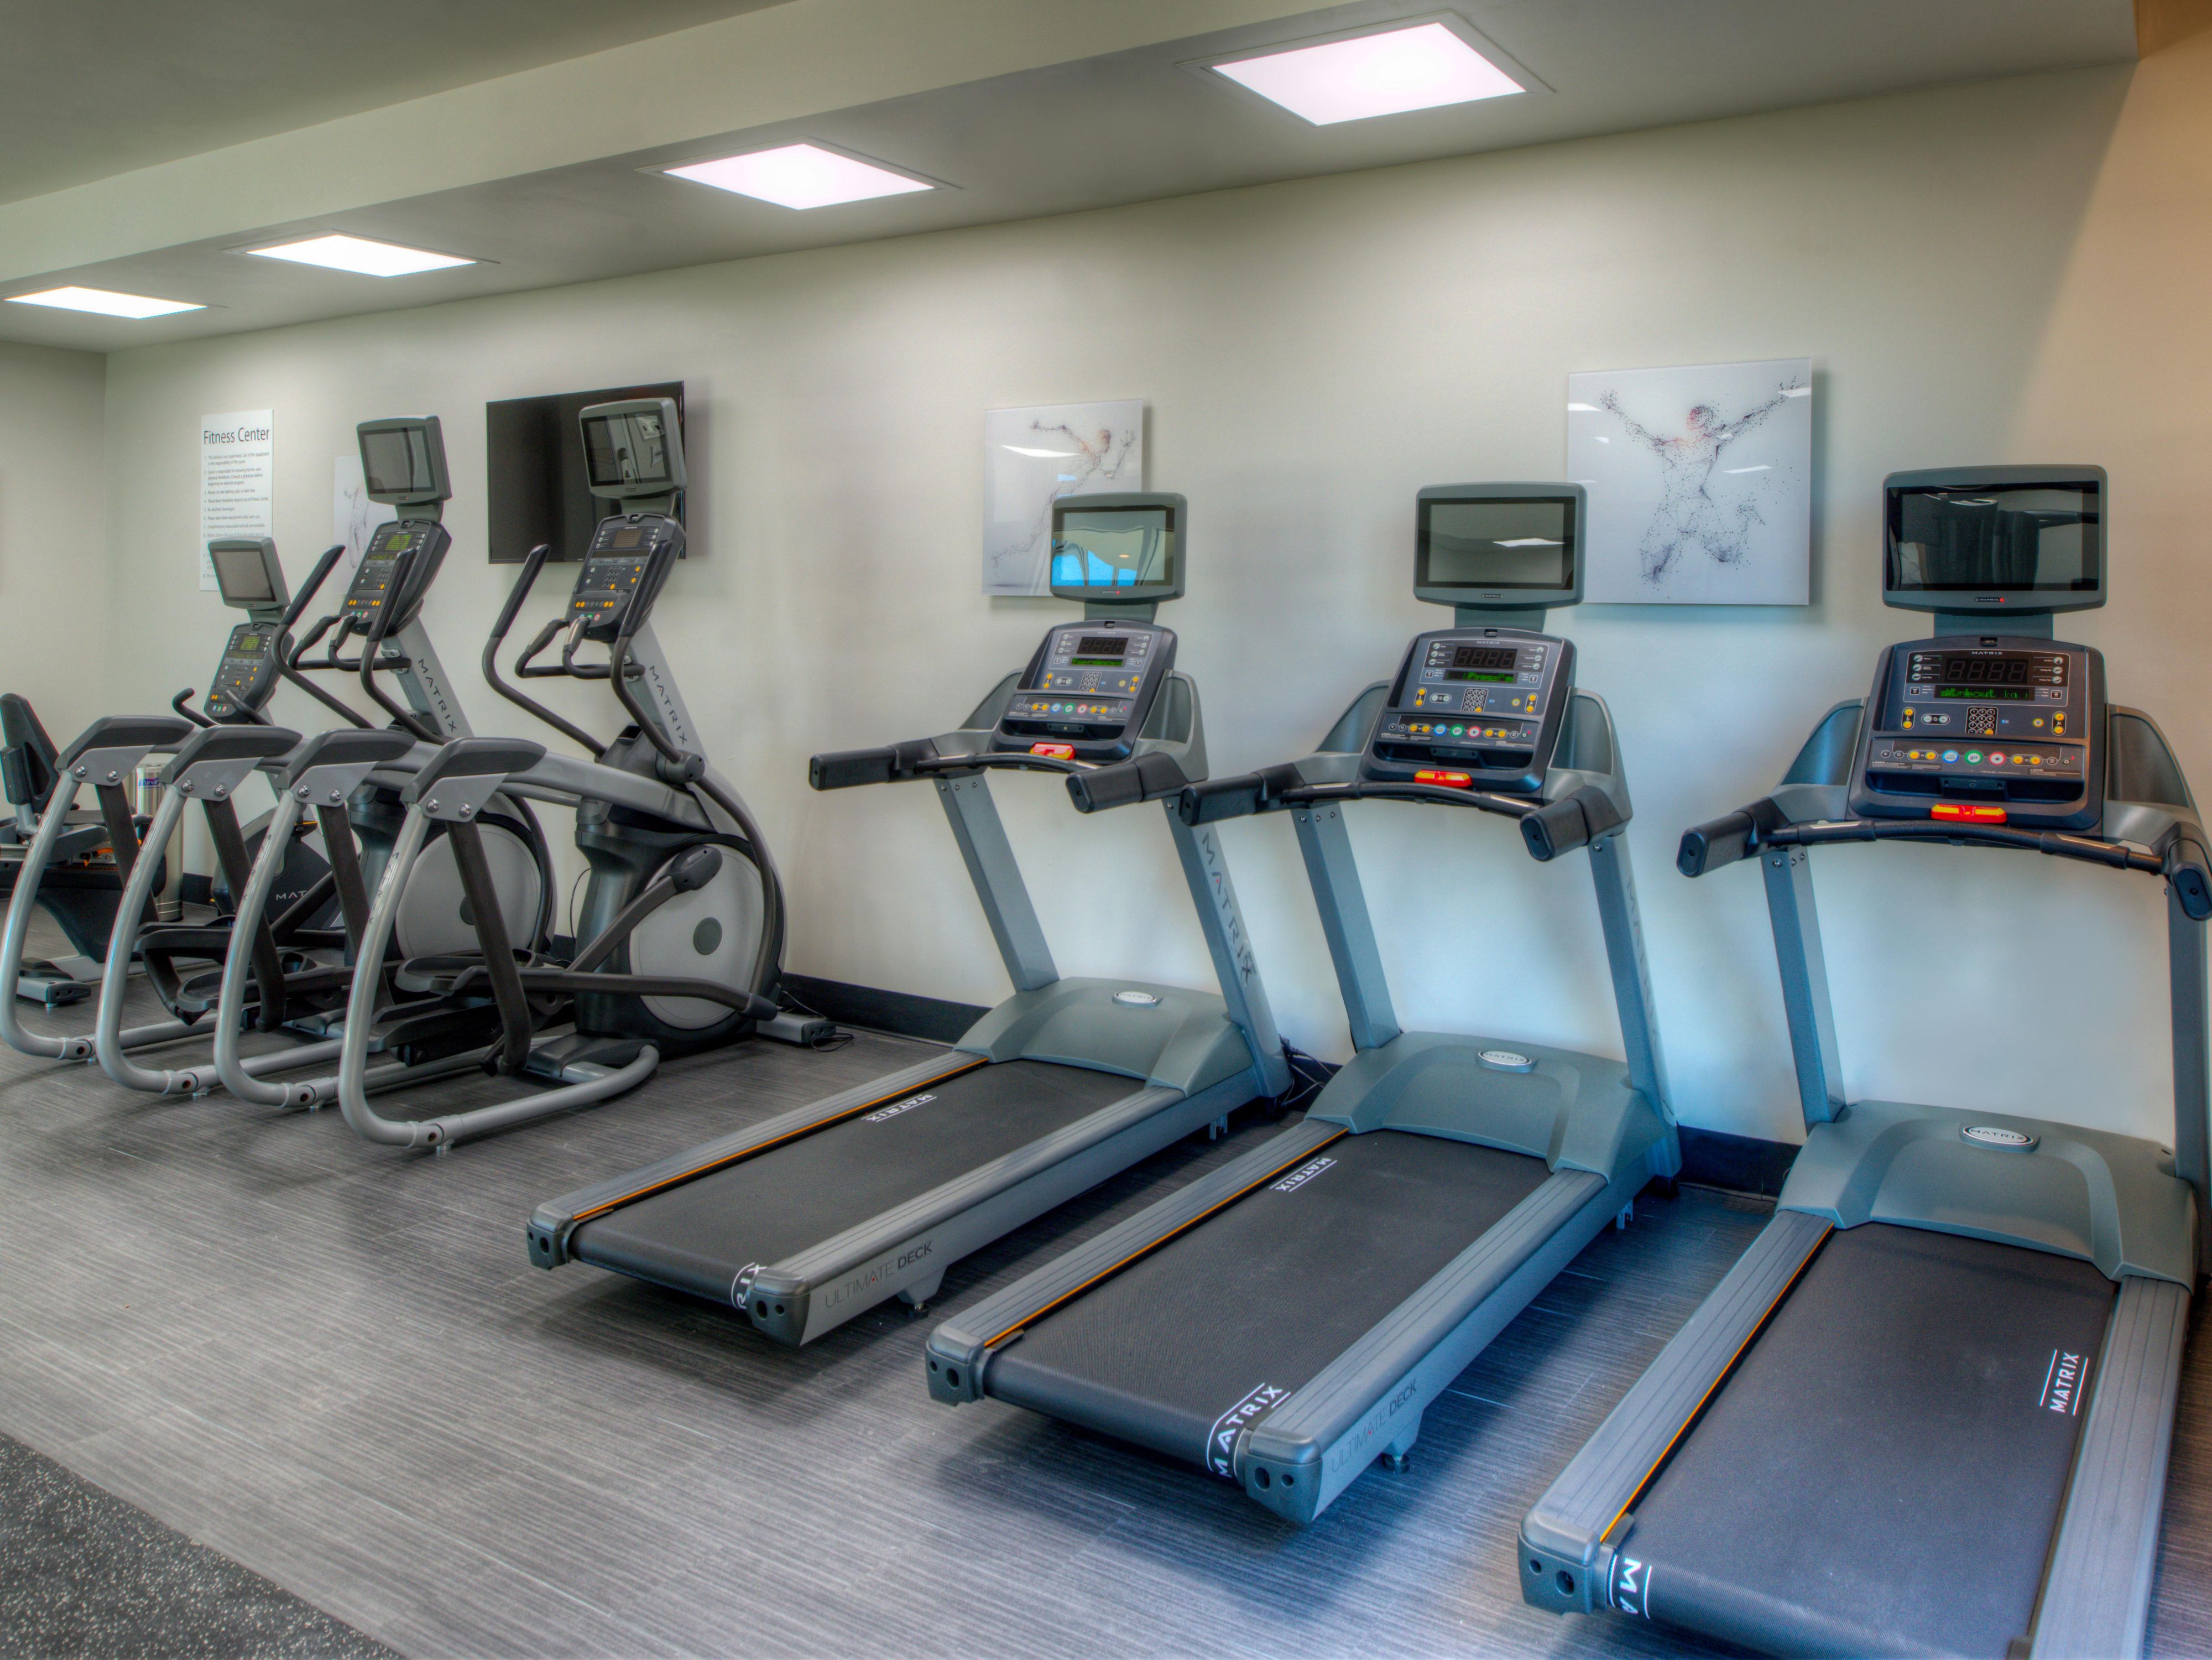 Stay active and fit with free weights and cardio equipment during your stay in Katy! When you're finished, cool off and relax with a dip in an indoor pool.